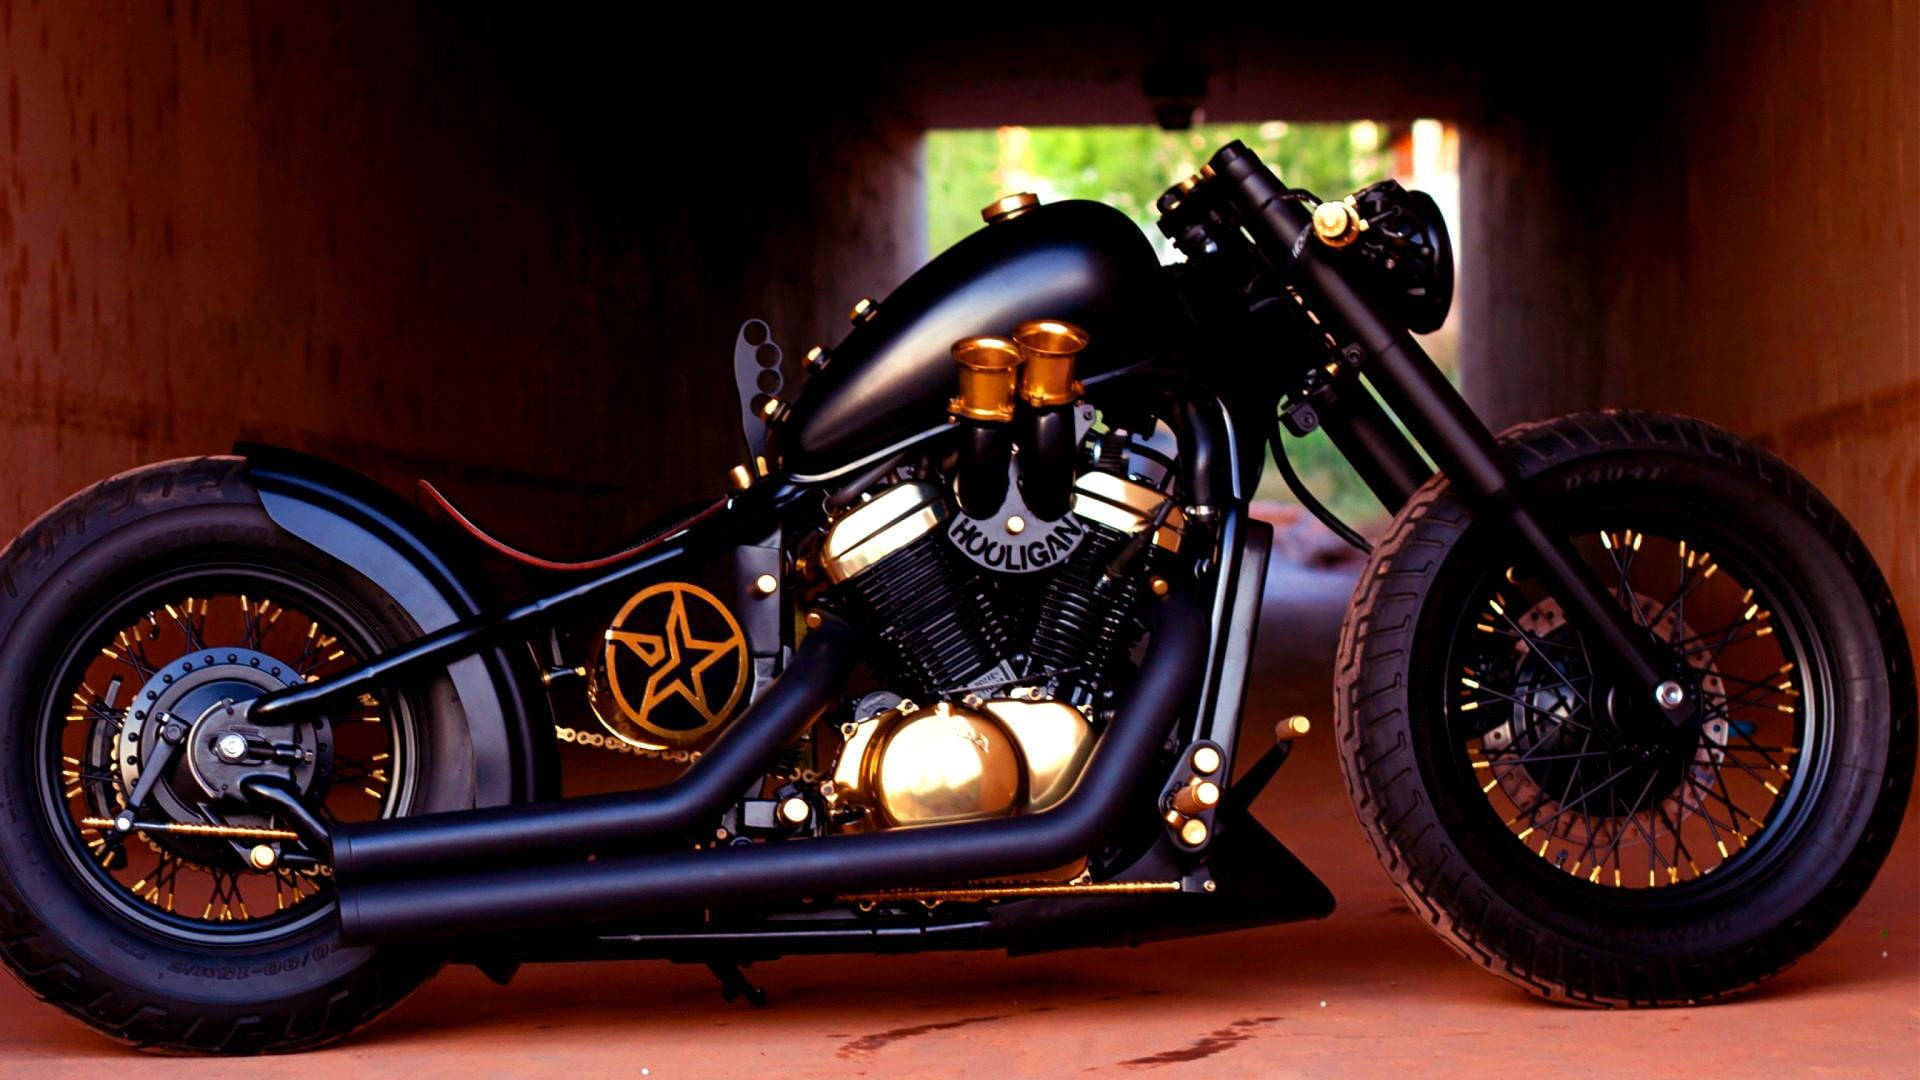 Bobber Motorcycle Images Wallpapers